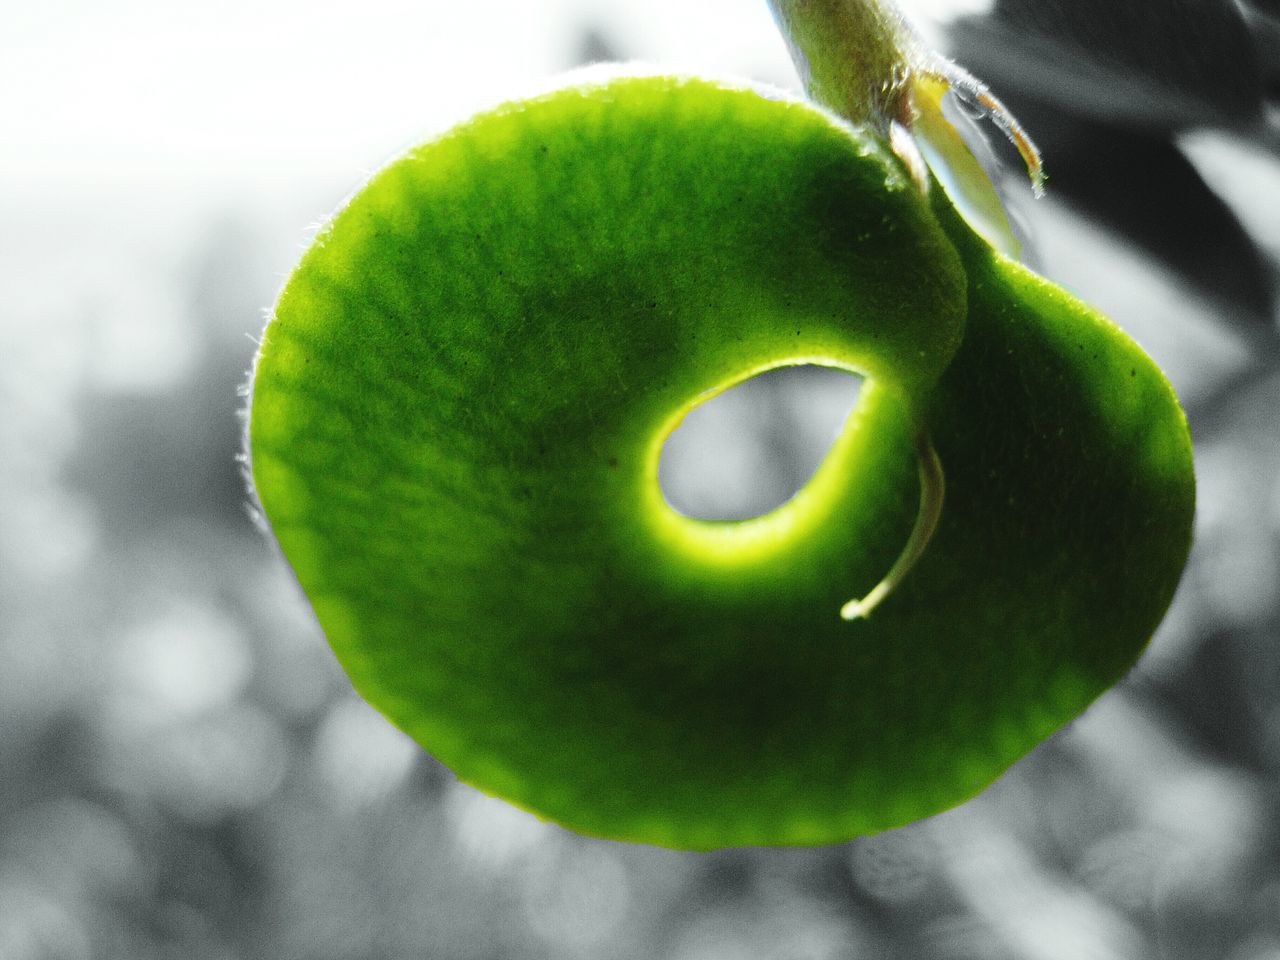 green color, close-up, green, fruit, focus on foreground, single object, yellow, no people, still life, nature, selective focus, outdoors, day, studio shot, freshness, natural pattern, circle, hole, healthy eating